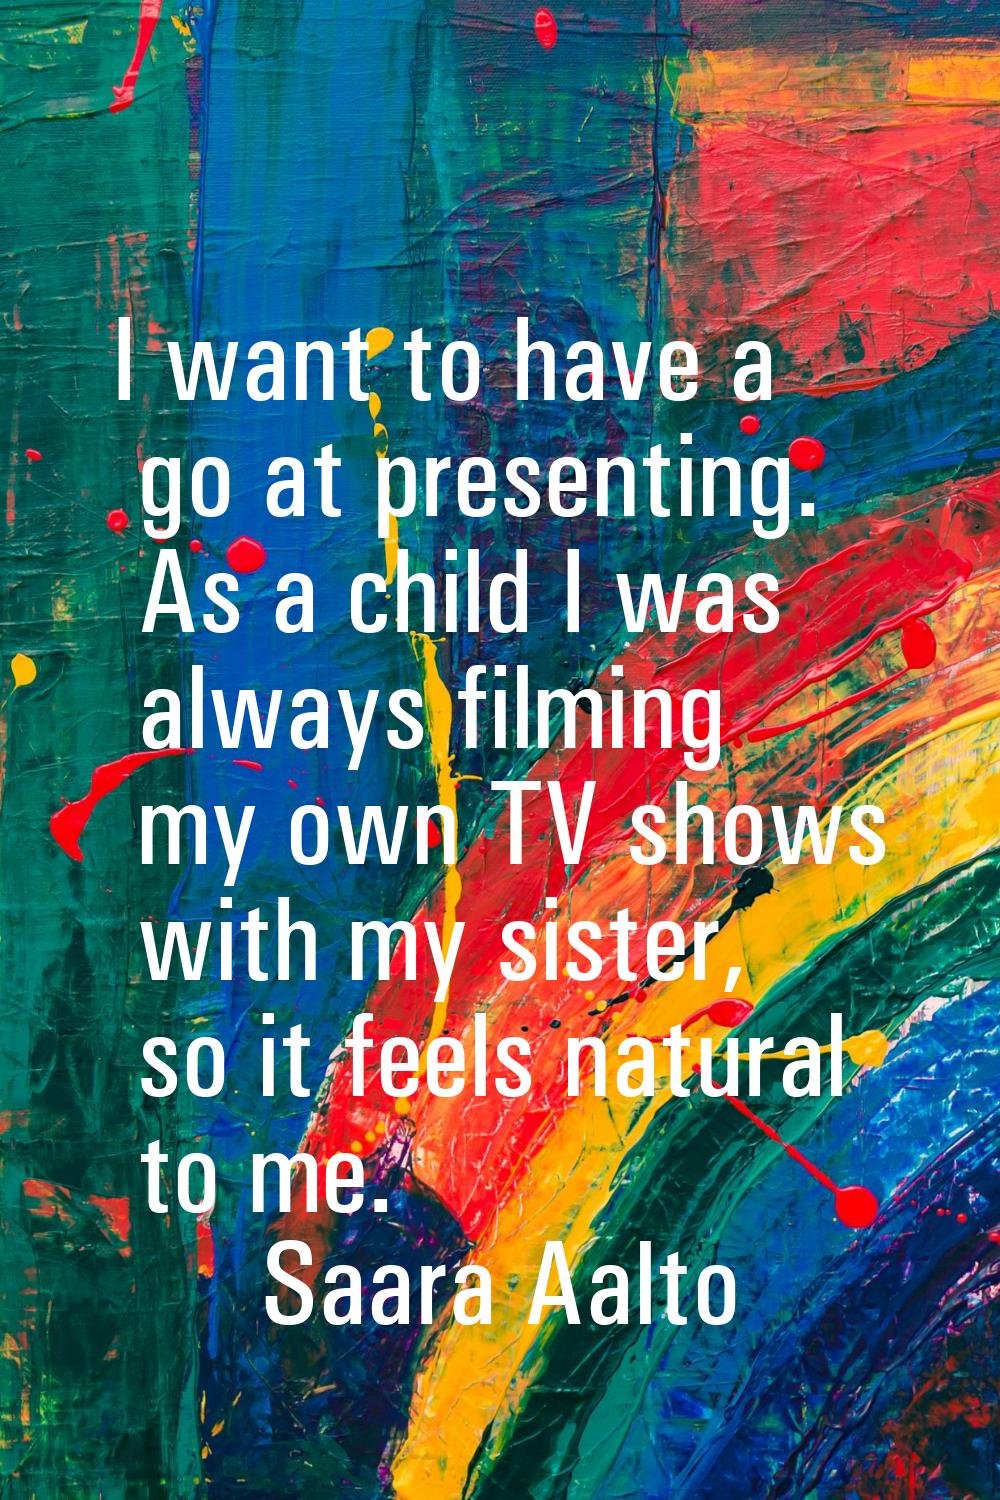 I want to have a go at presenting. As a child I was always filming my own TV shows with my sister, 